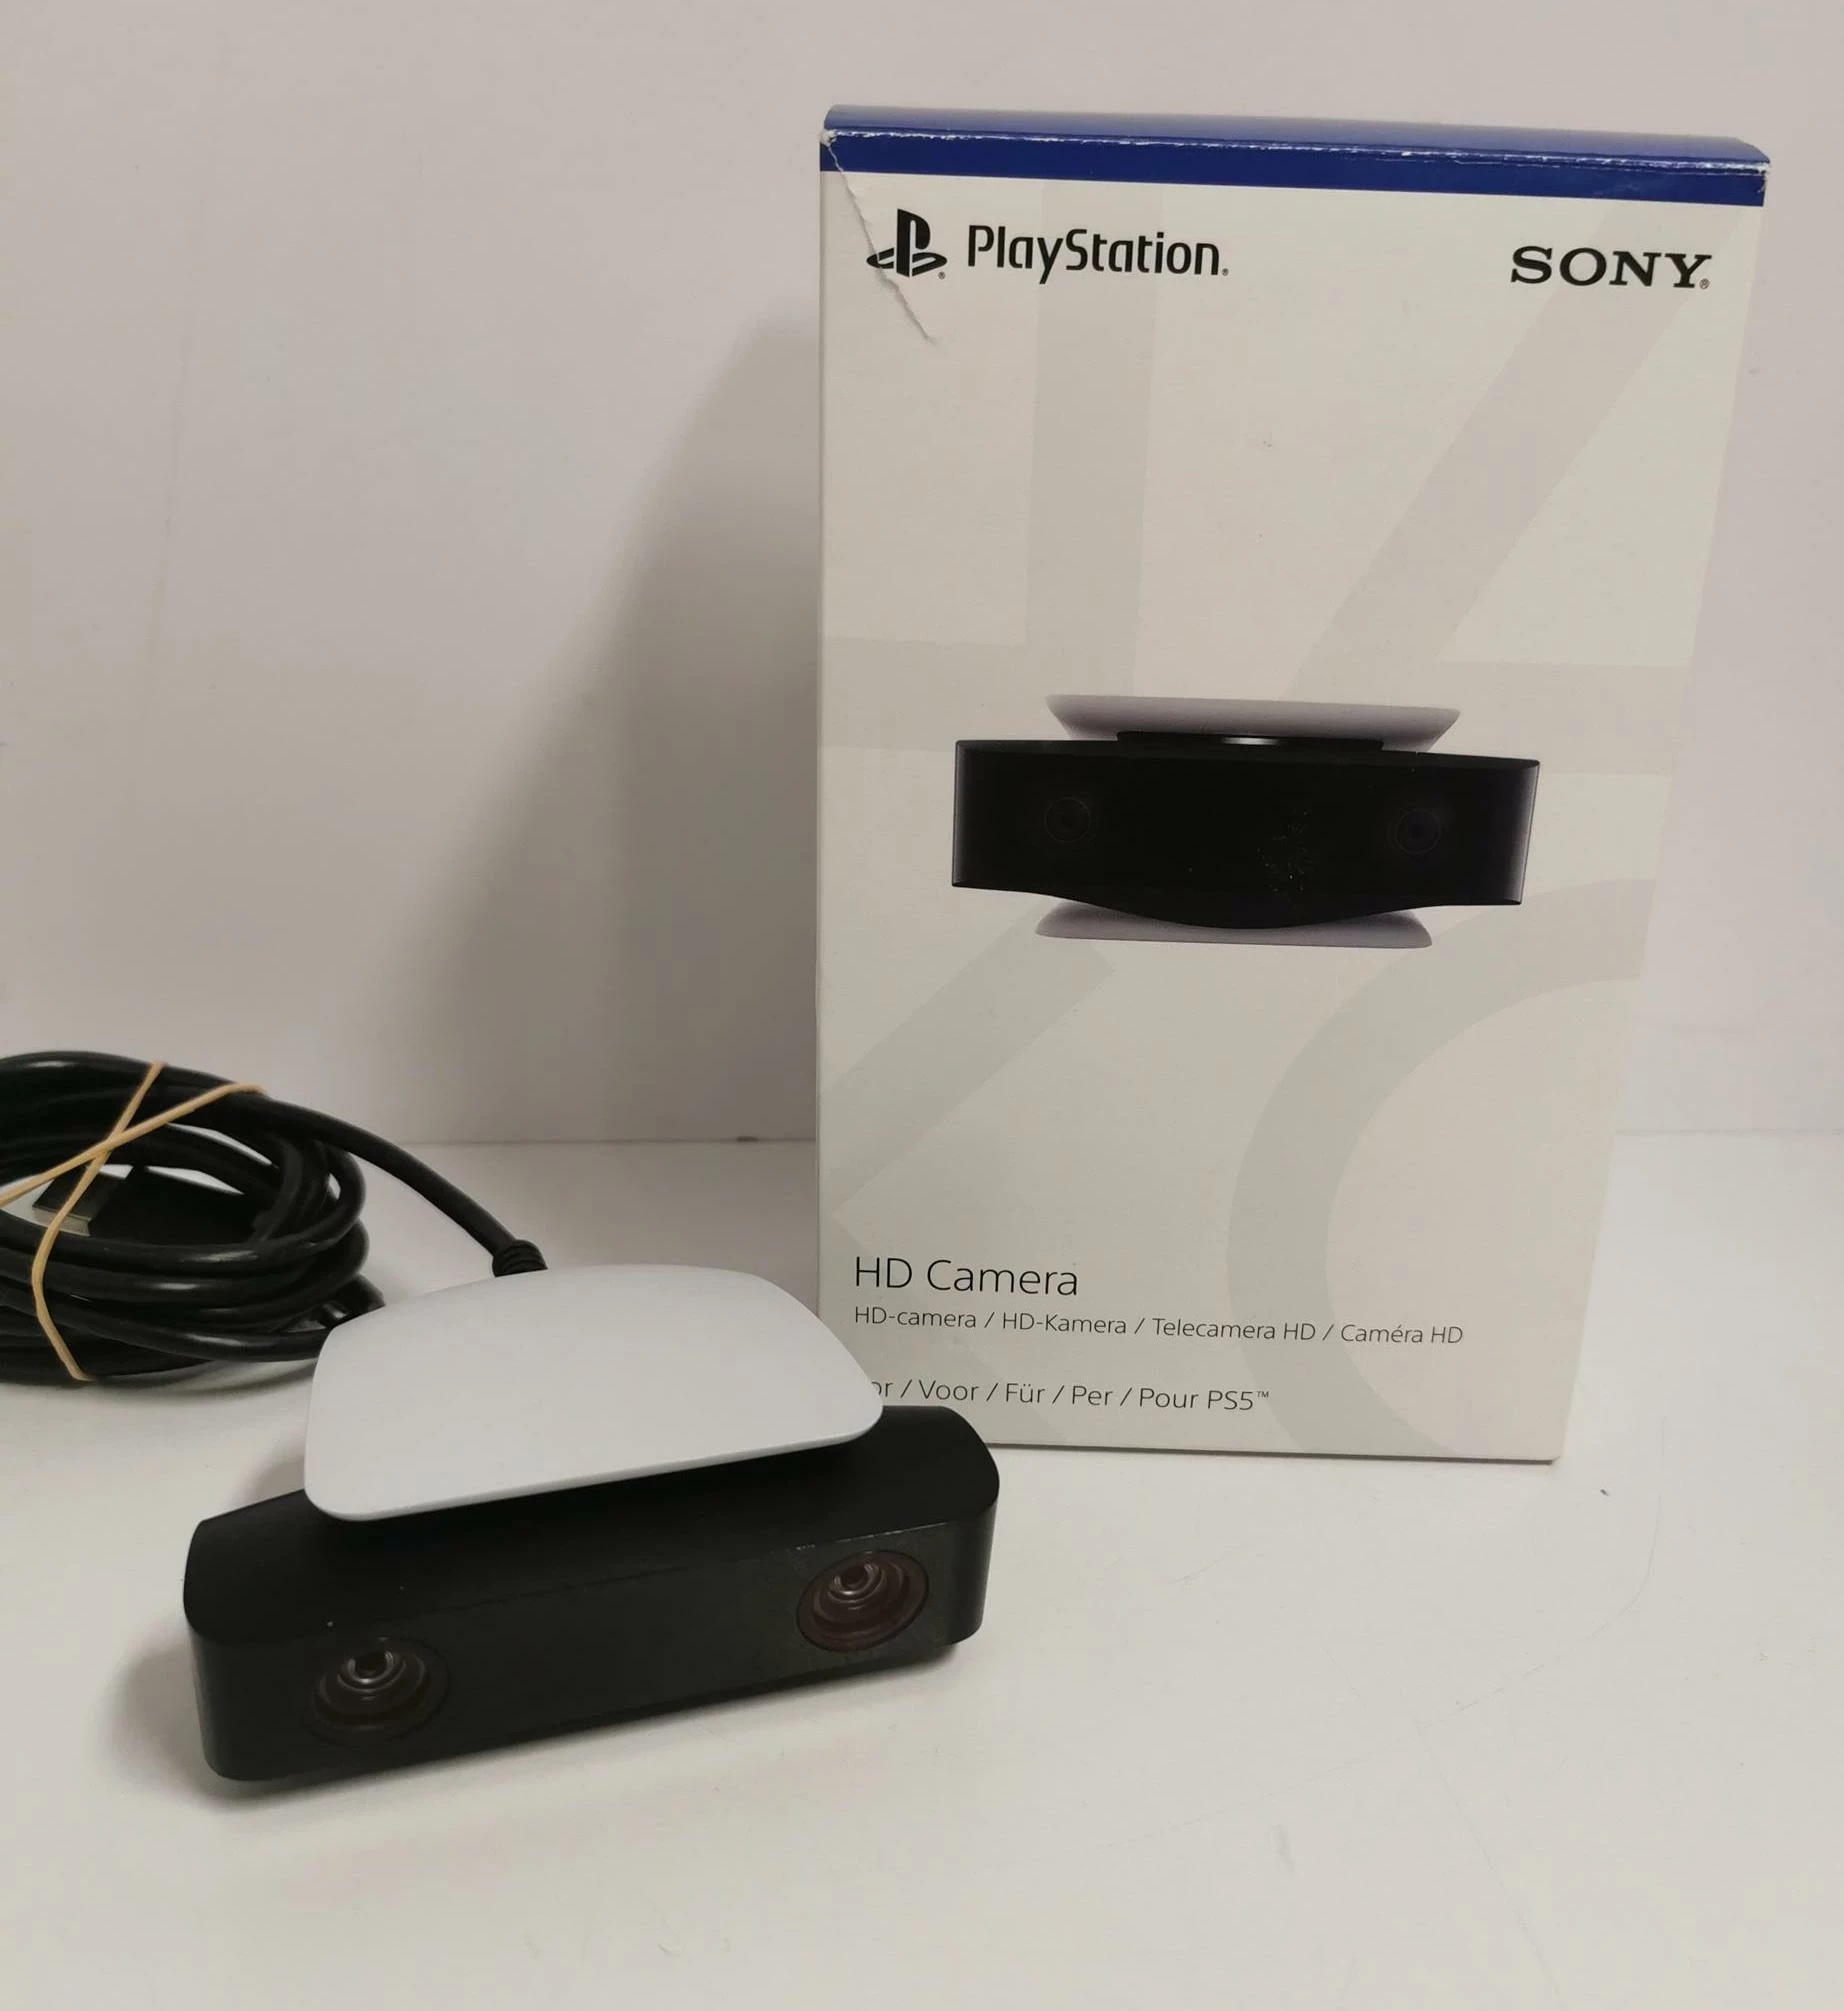 Caméra HD pour PS5 Sony PlayStation 5